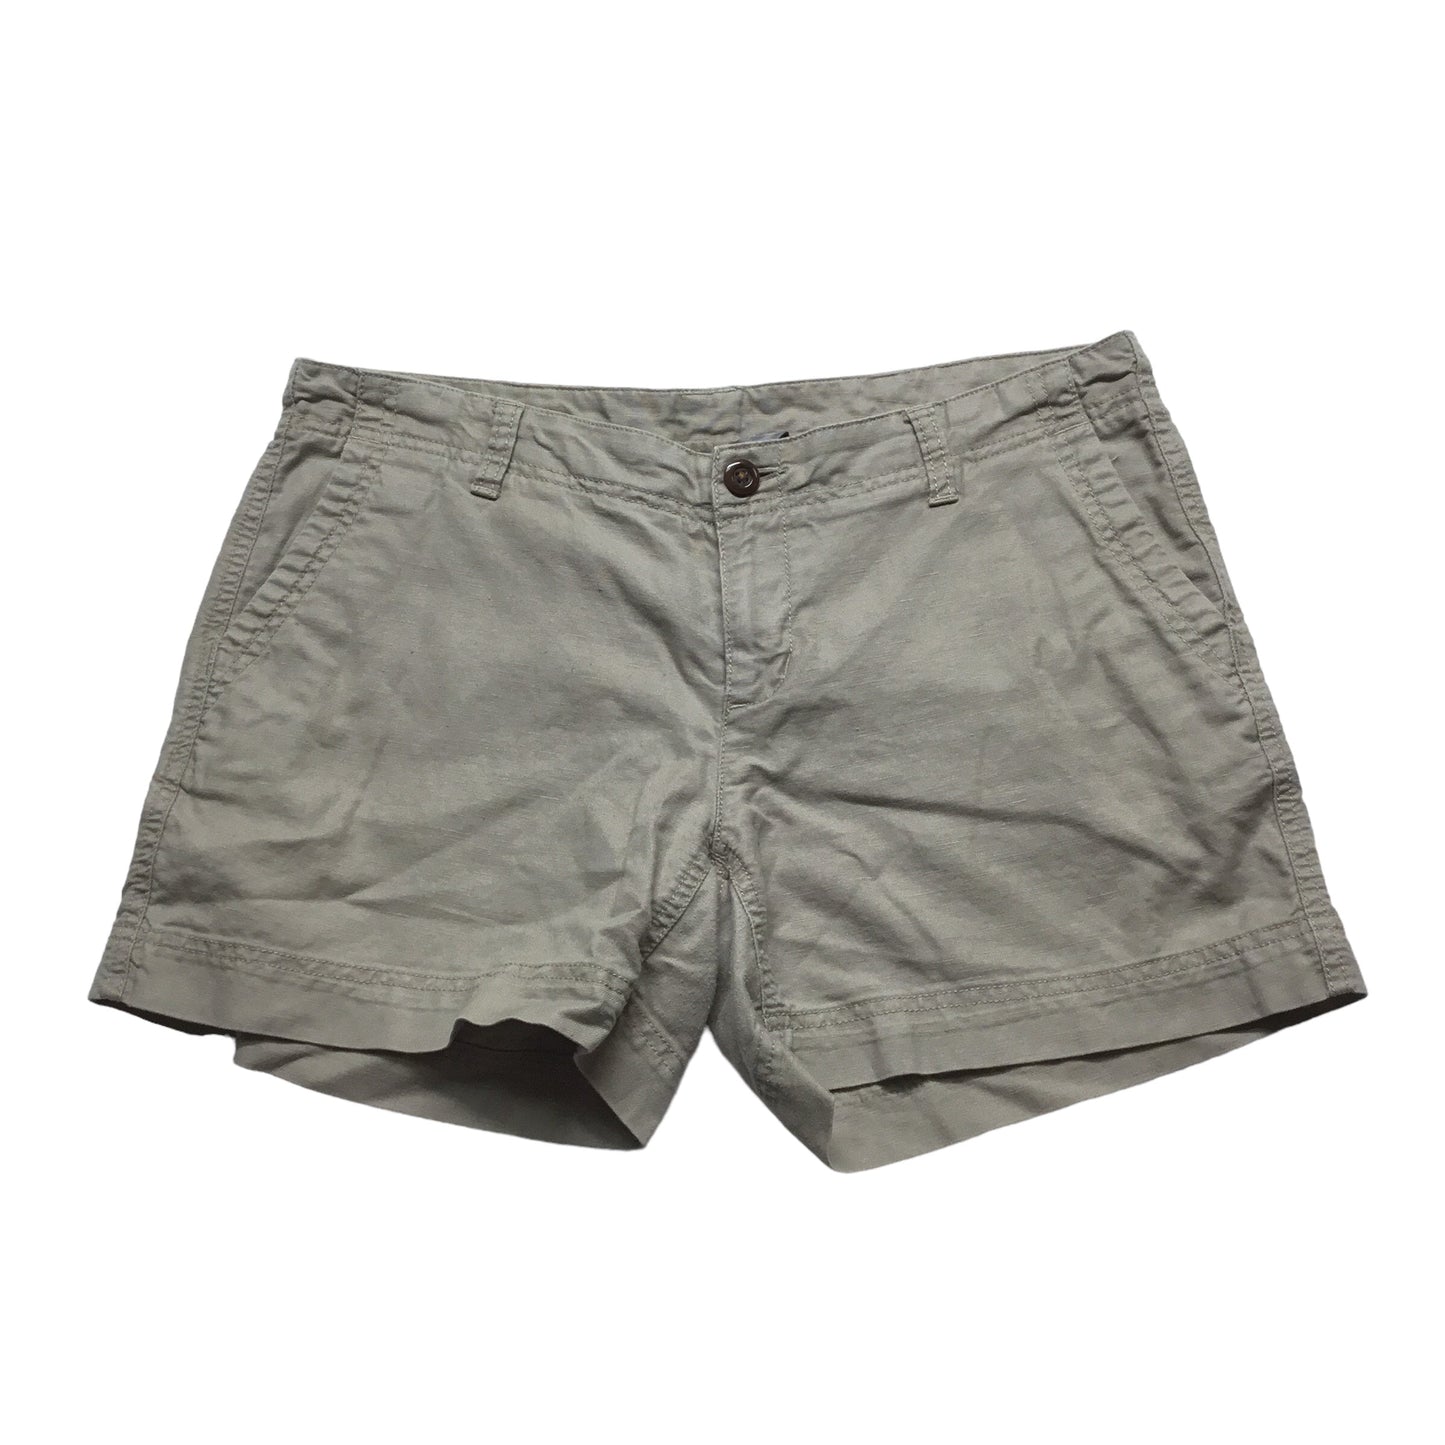 Tan Shorts The North Face, Size 8